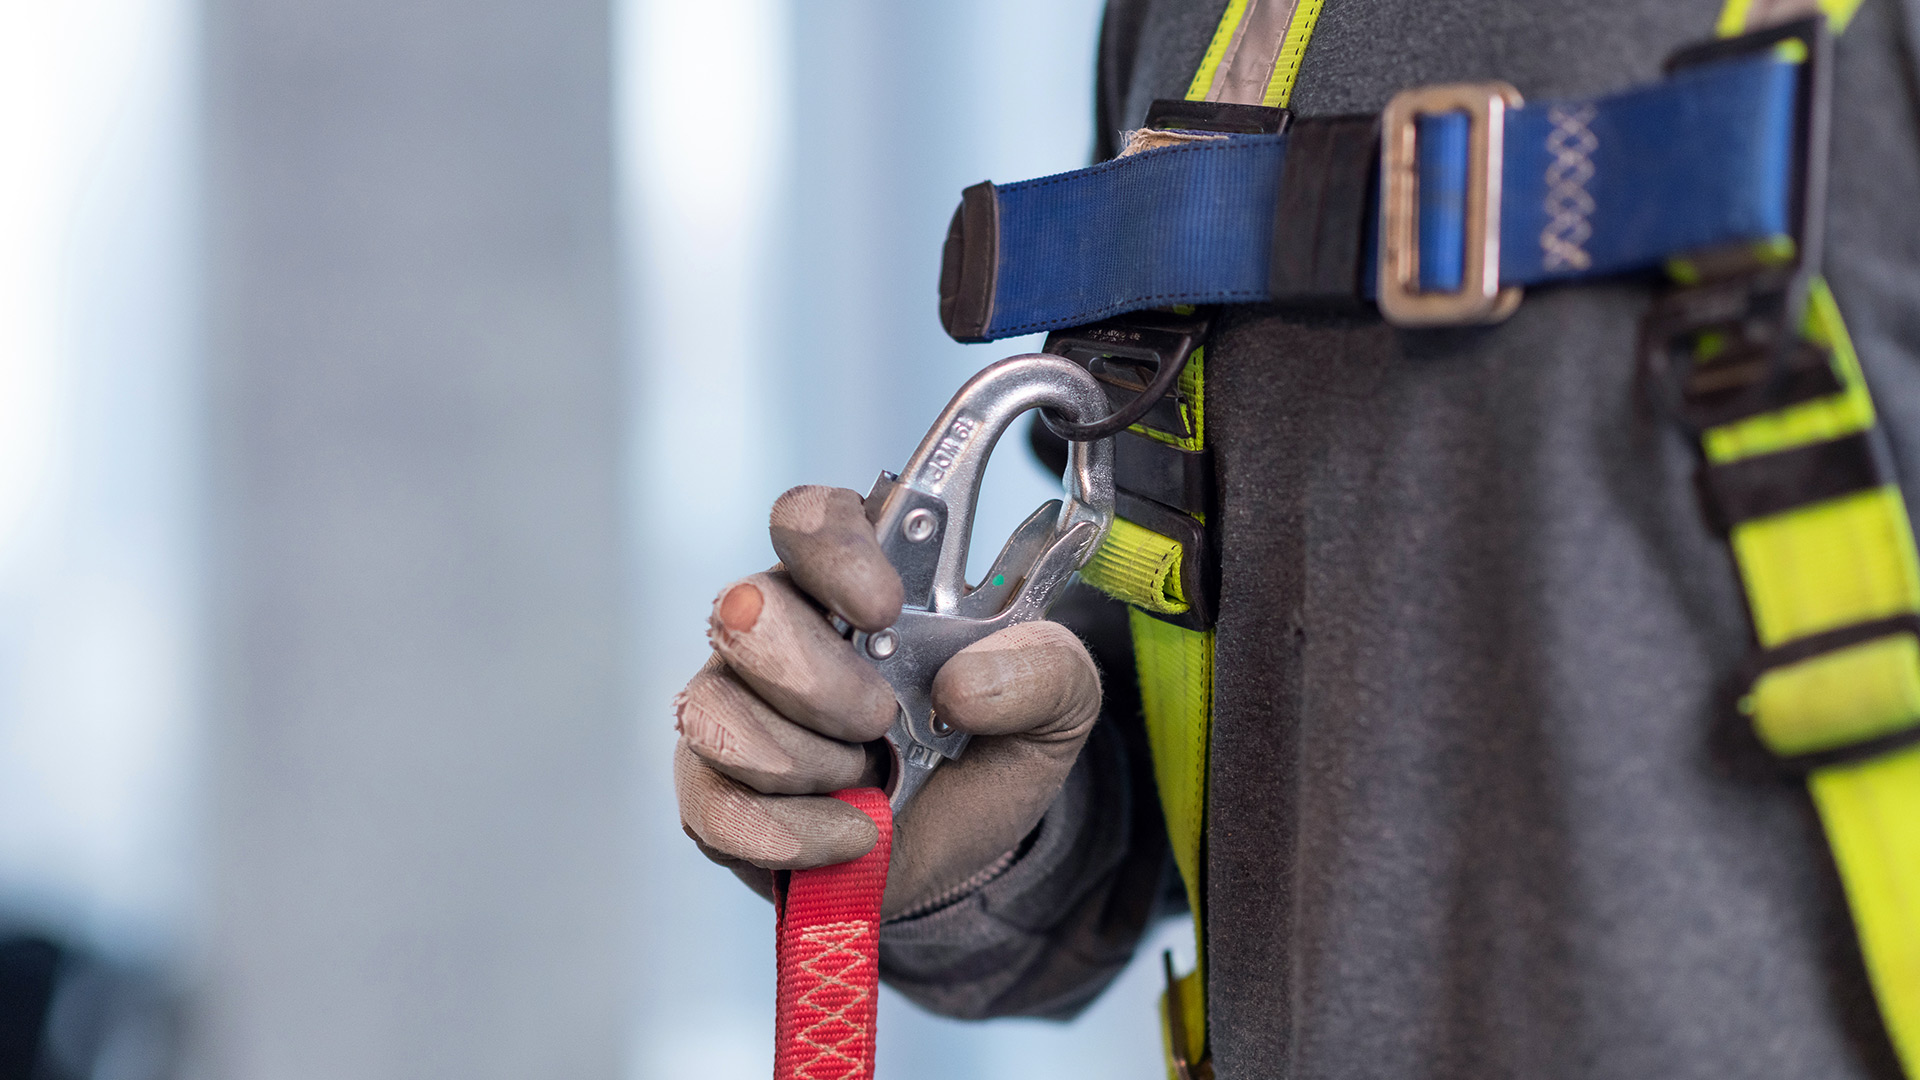 A Houle team member fastening their safety harness